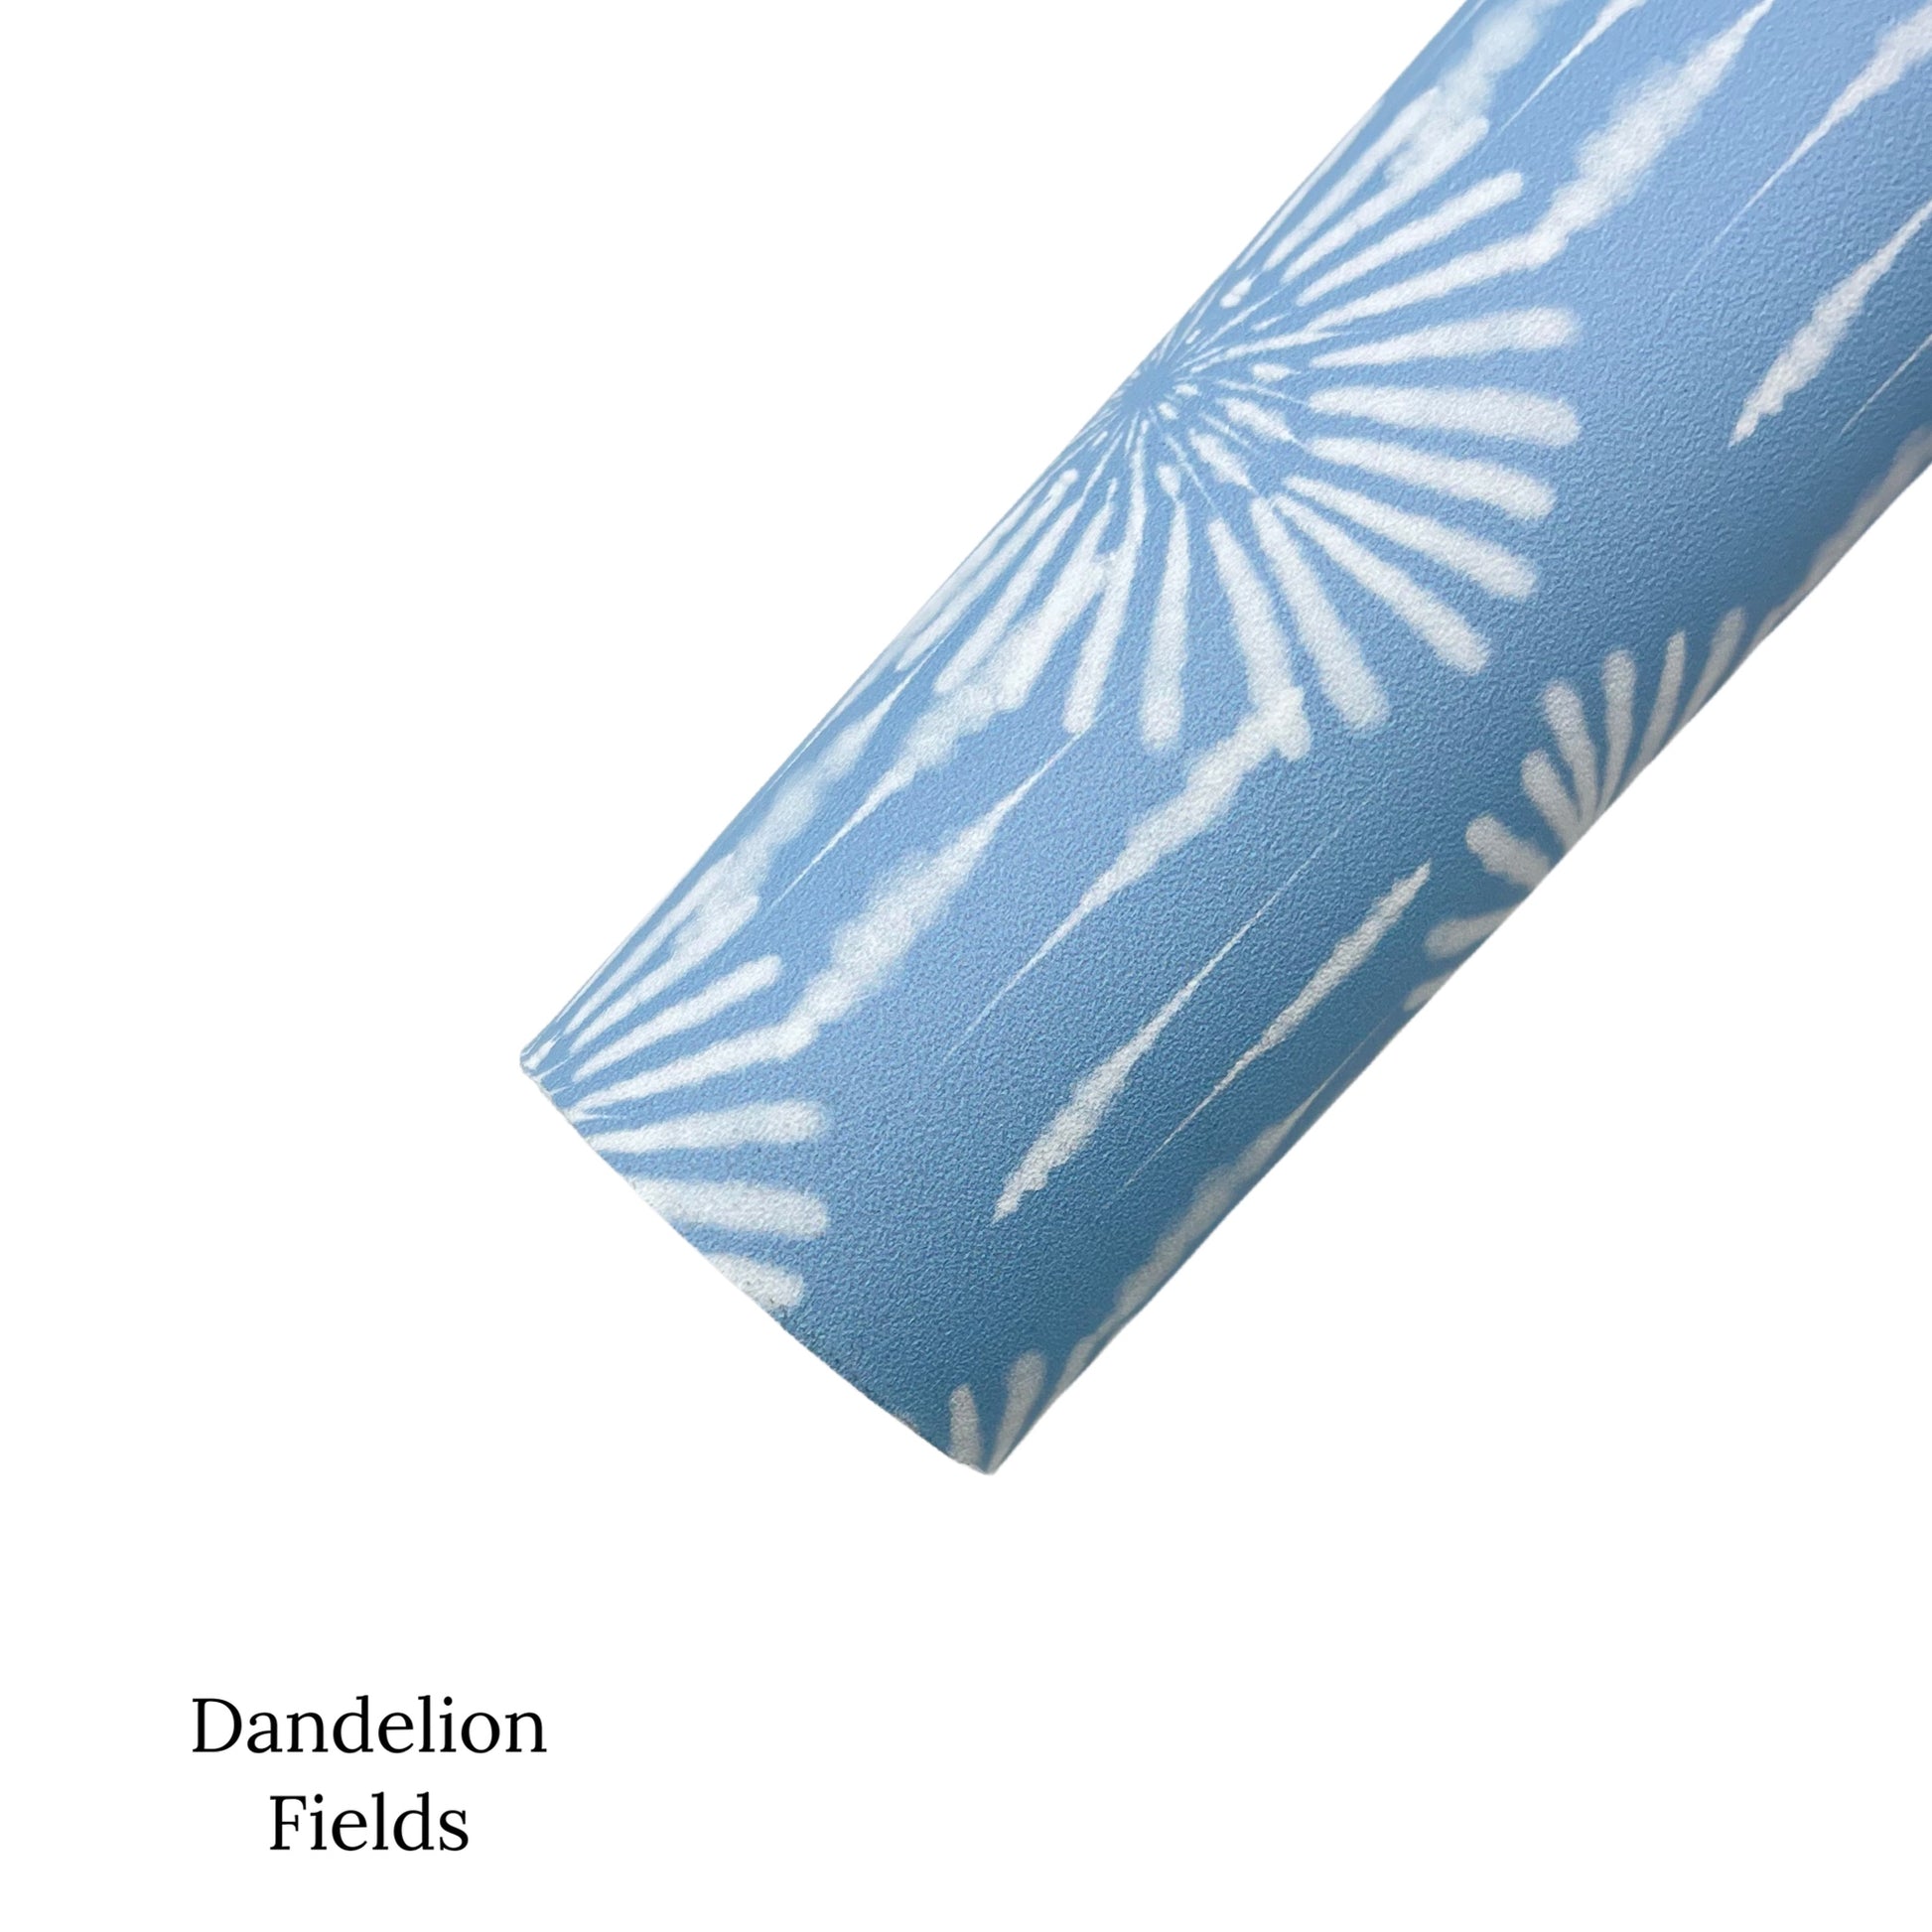 Rolled powder blue faux leather sheet with white tie-dye pattern.